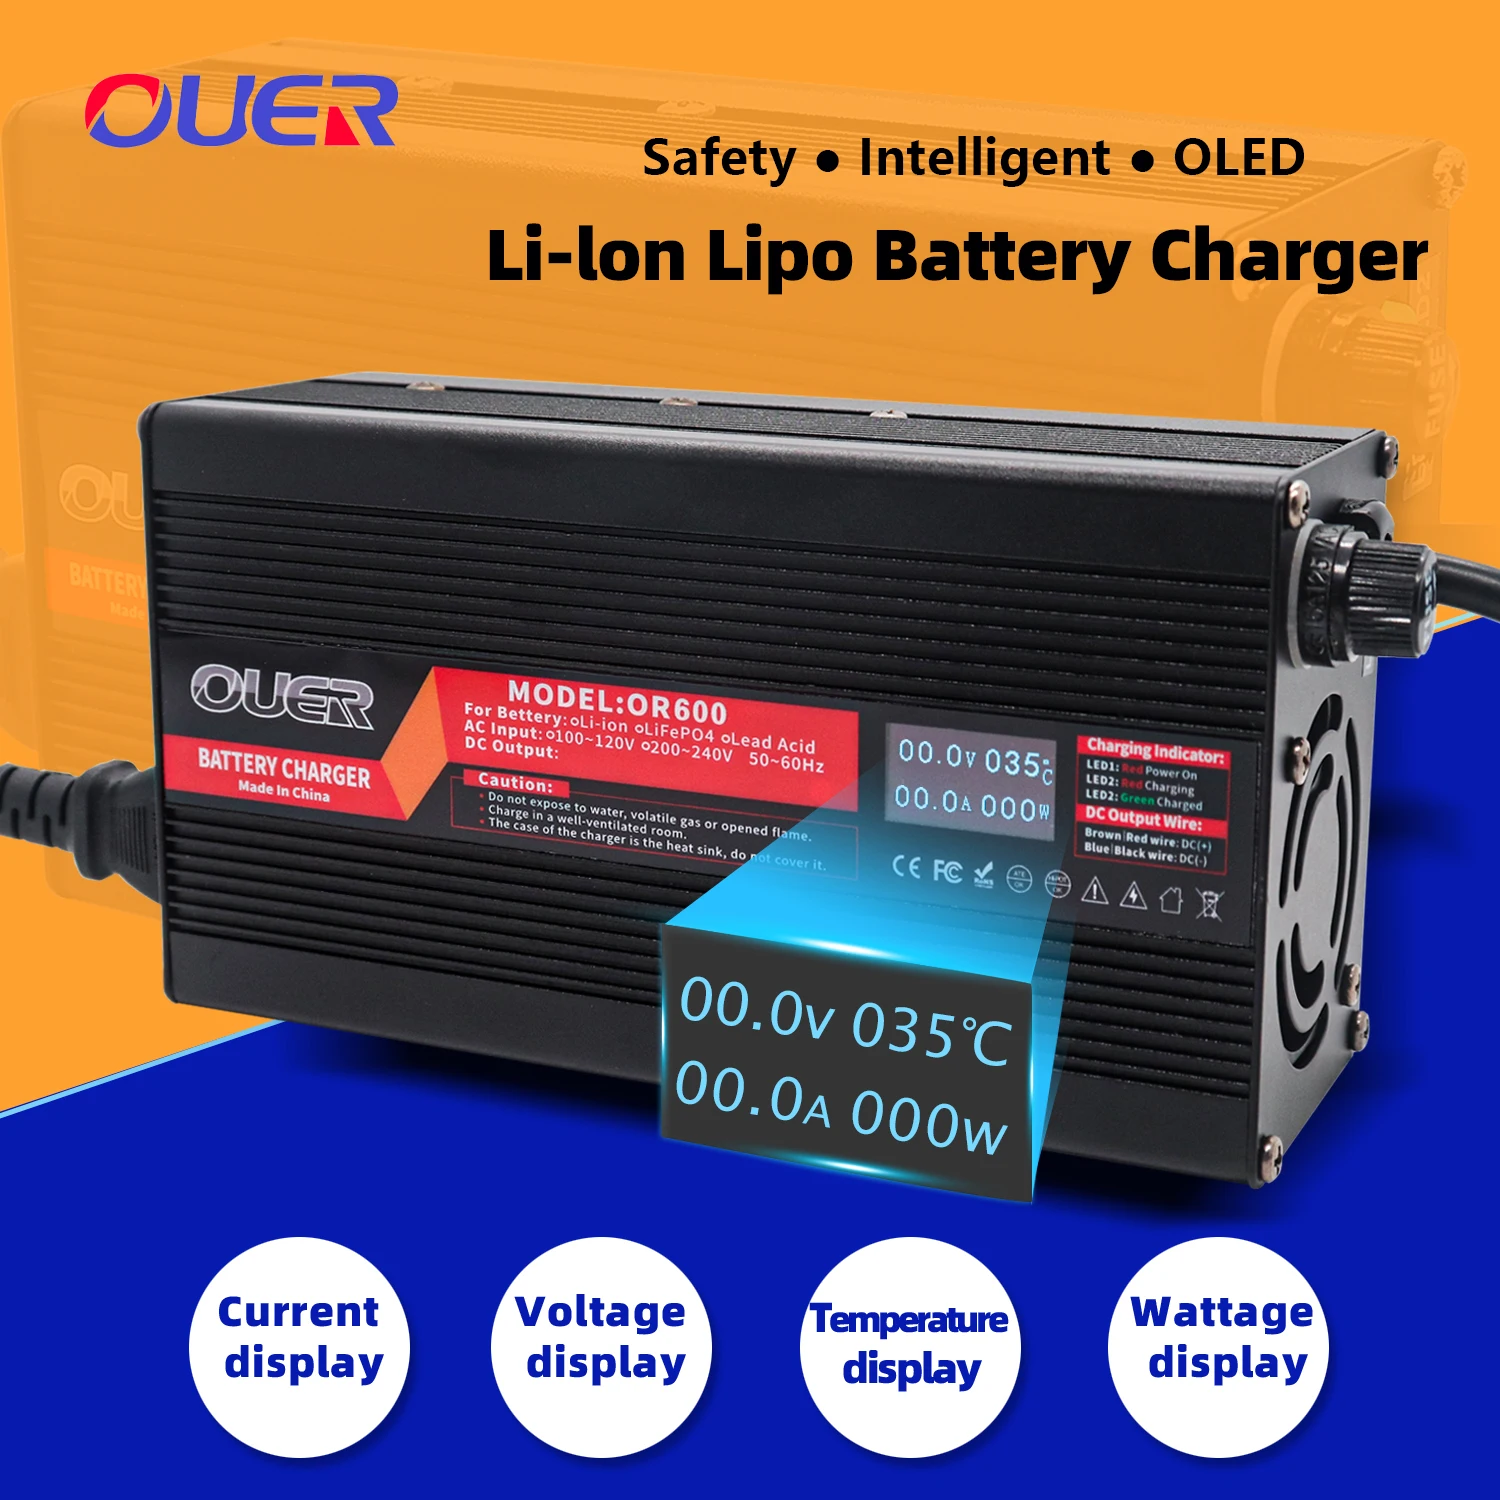 

46.2V 12A Li-ion Battery Charger With OLED Display Usd For 11S 40.7V Lipo/LiMn2O4/LiCoO2 Battery Fast Charger